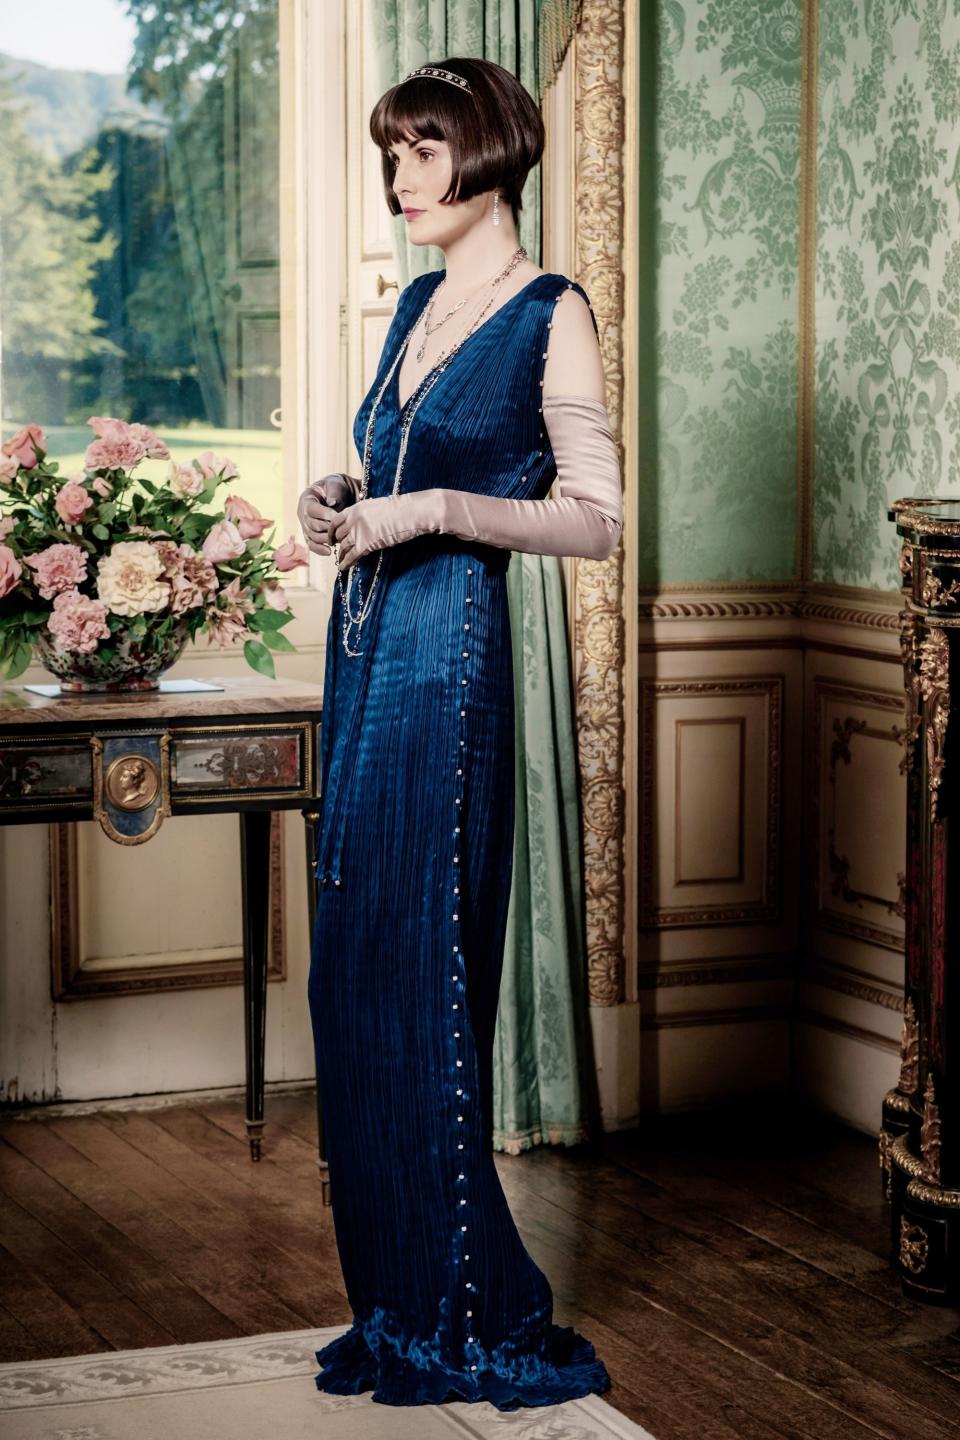 A woman wearing a more form-fitting dress on "Downton Abbey: A New Era"